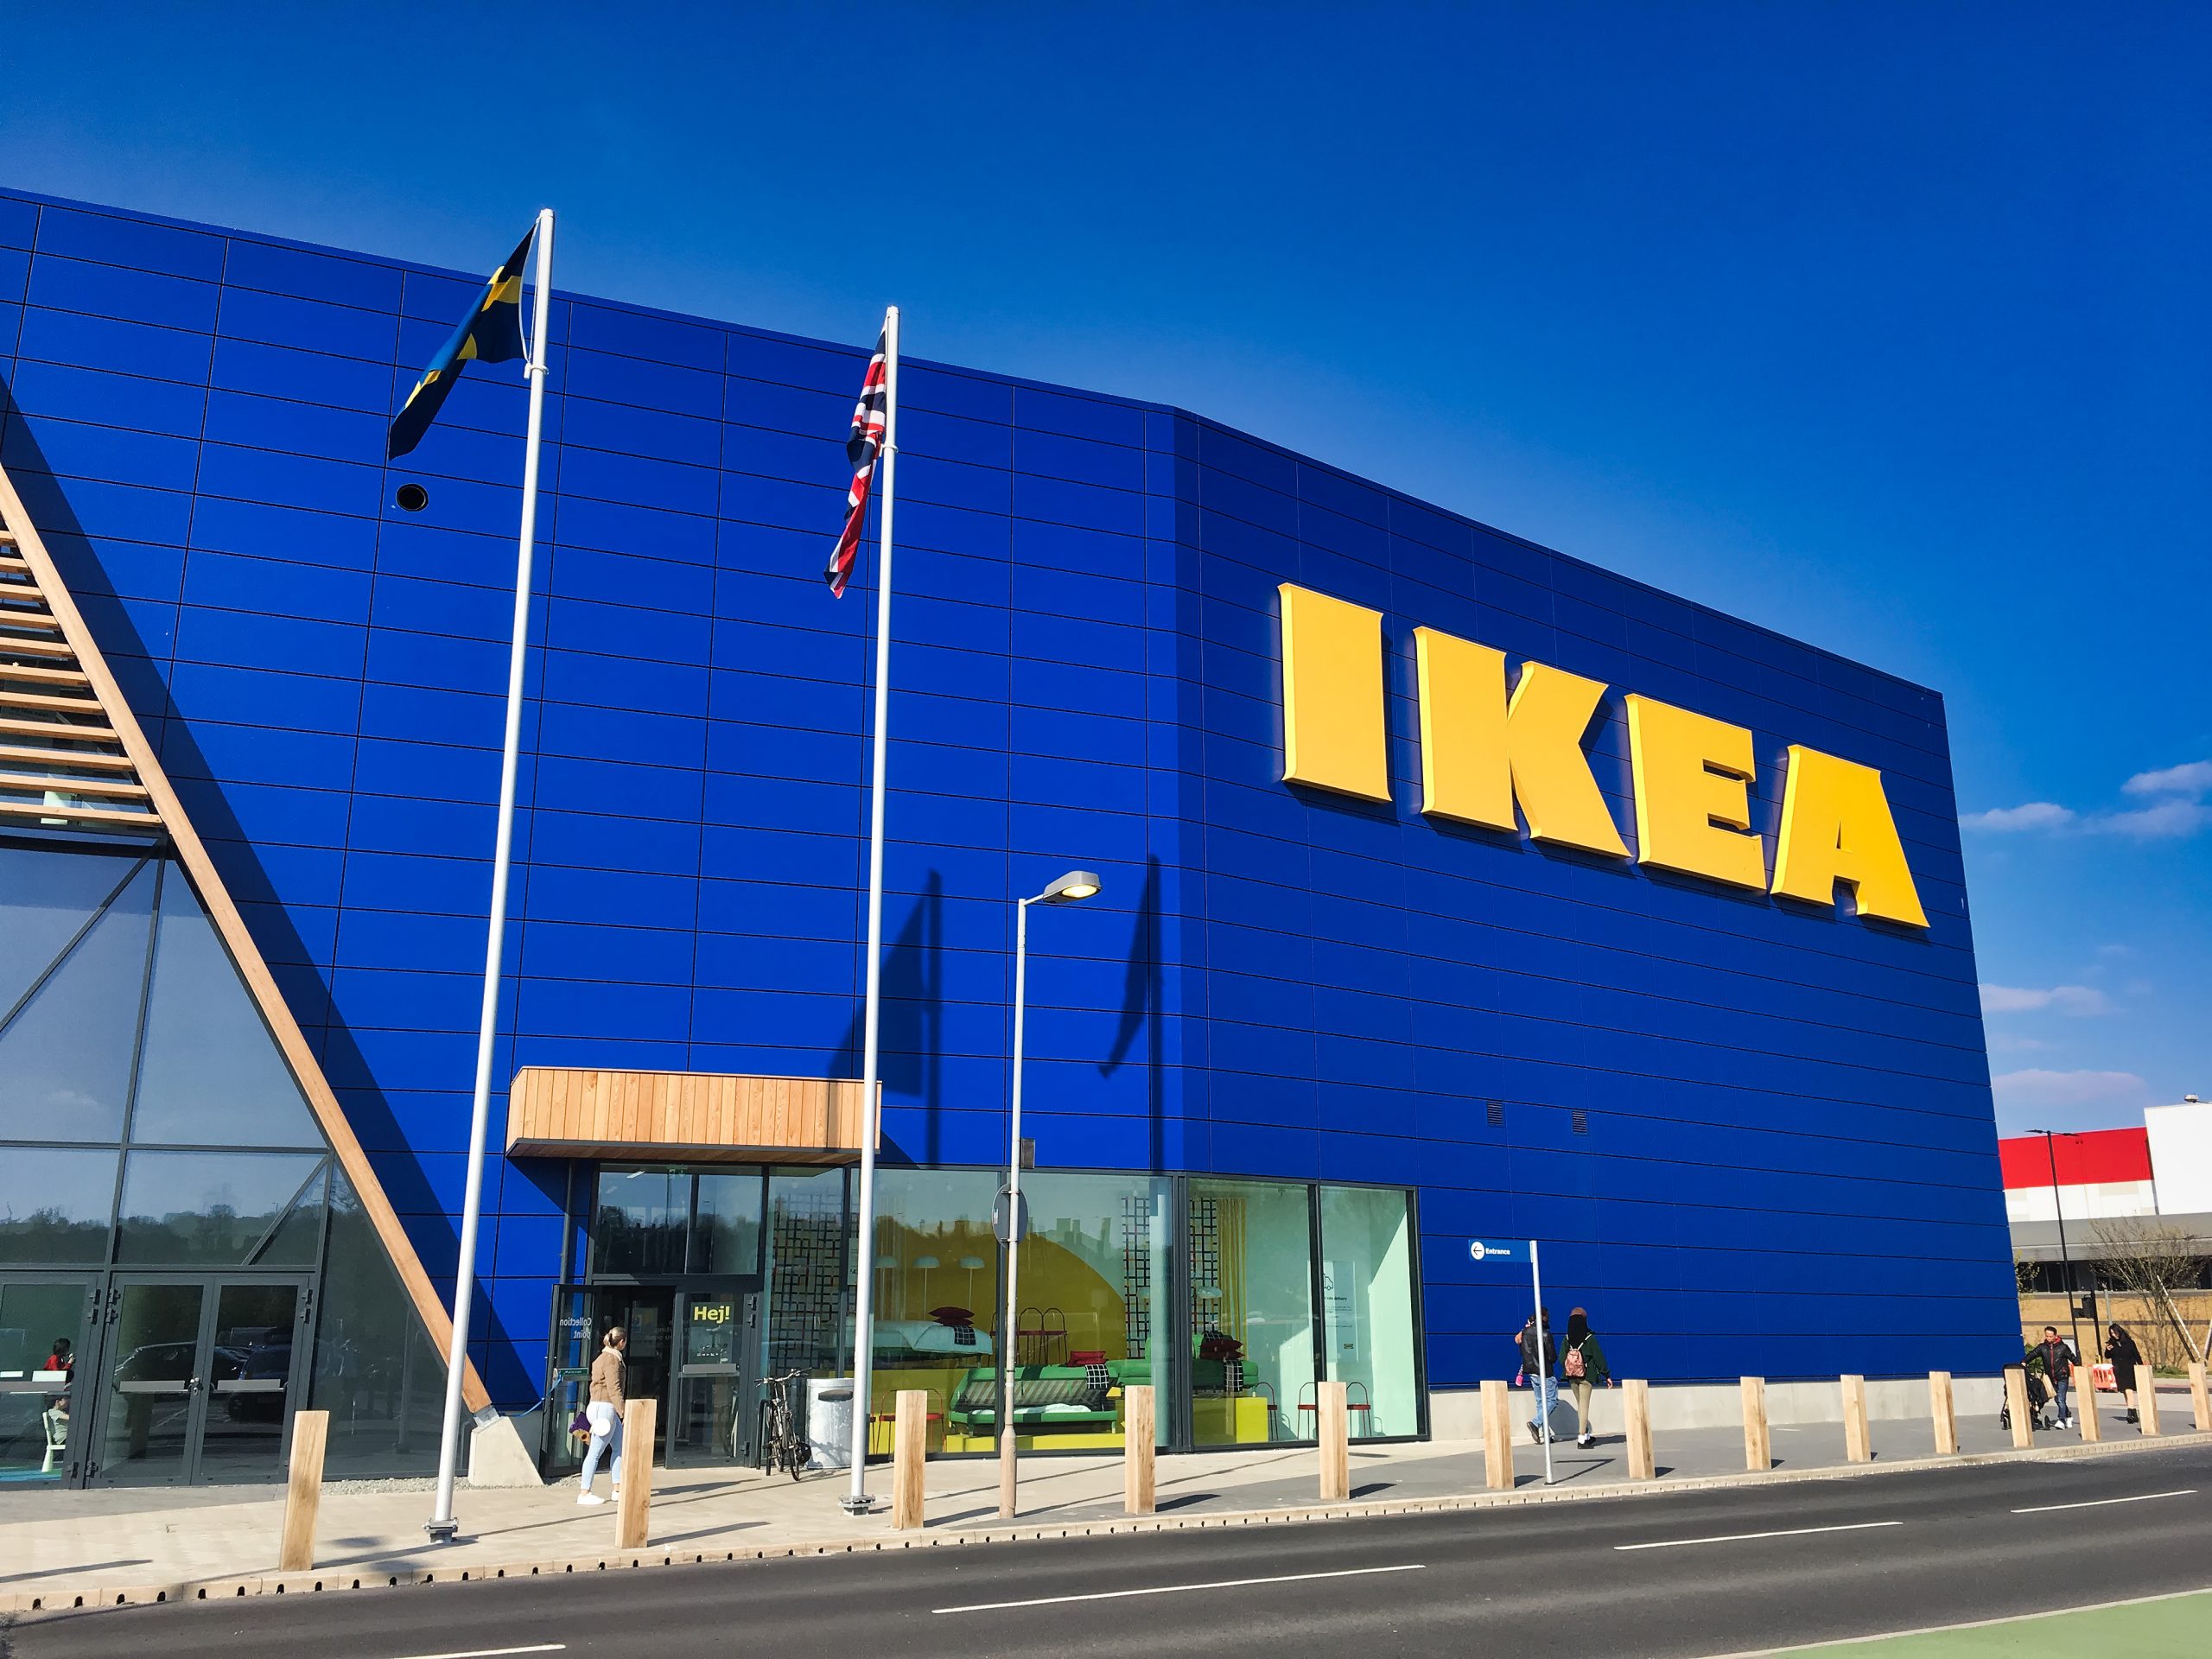 Ikea prices are 10% higher in the UK